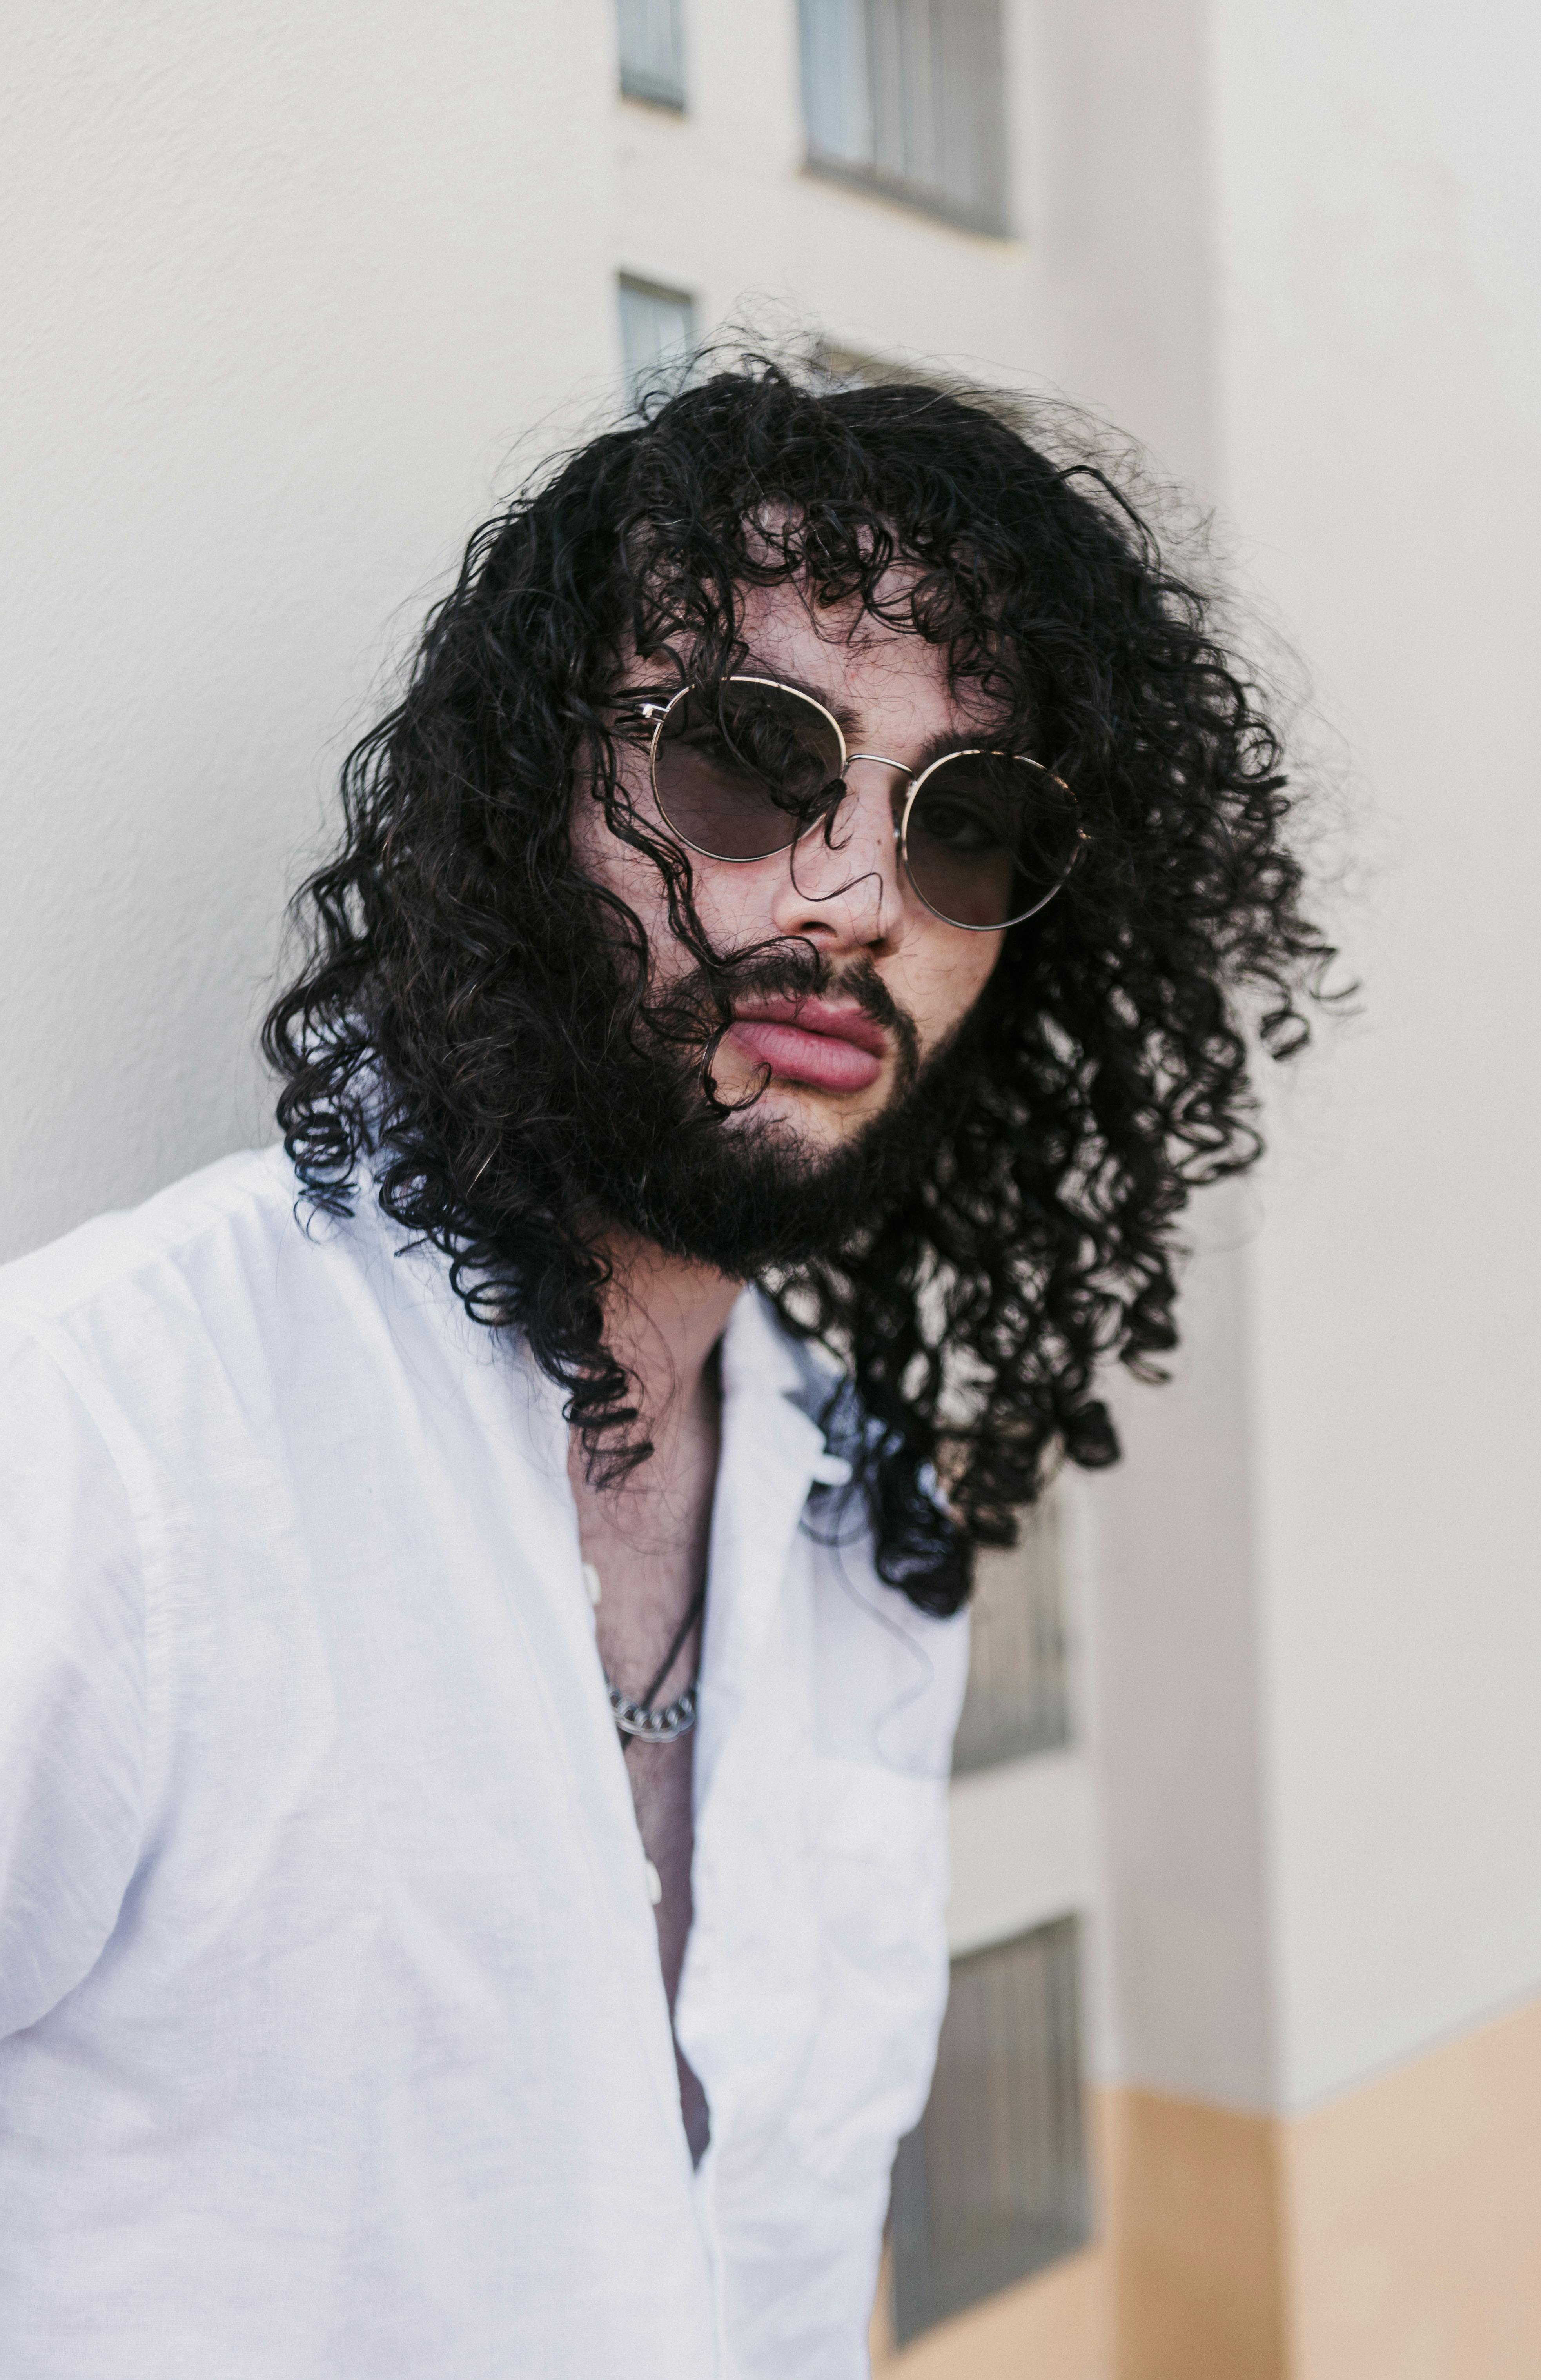 Man with Long Curly Black Hair and Beard · Free Stock Photo